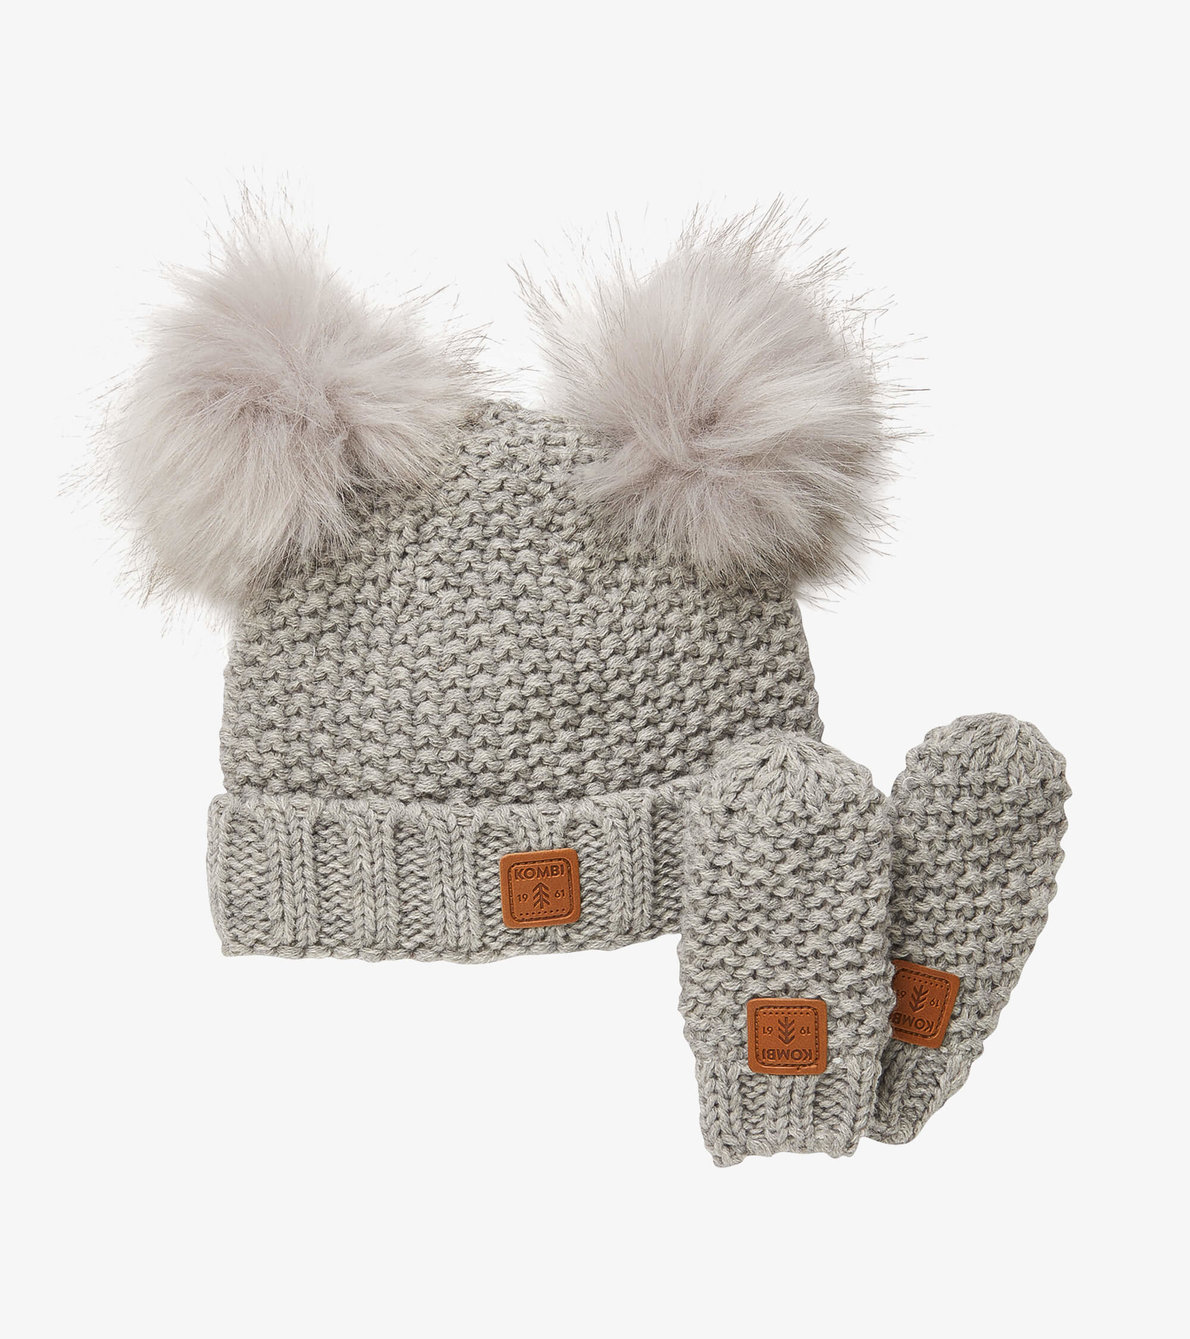 View larger image of Kombi Baby Grey Adorable Knit Toque and Mittens Set